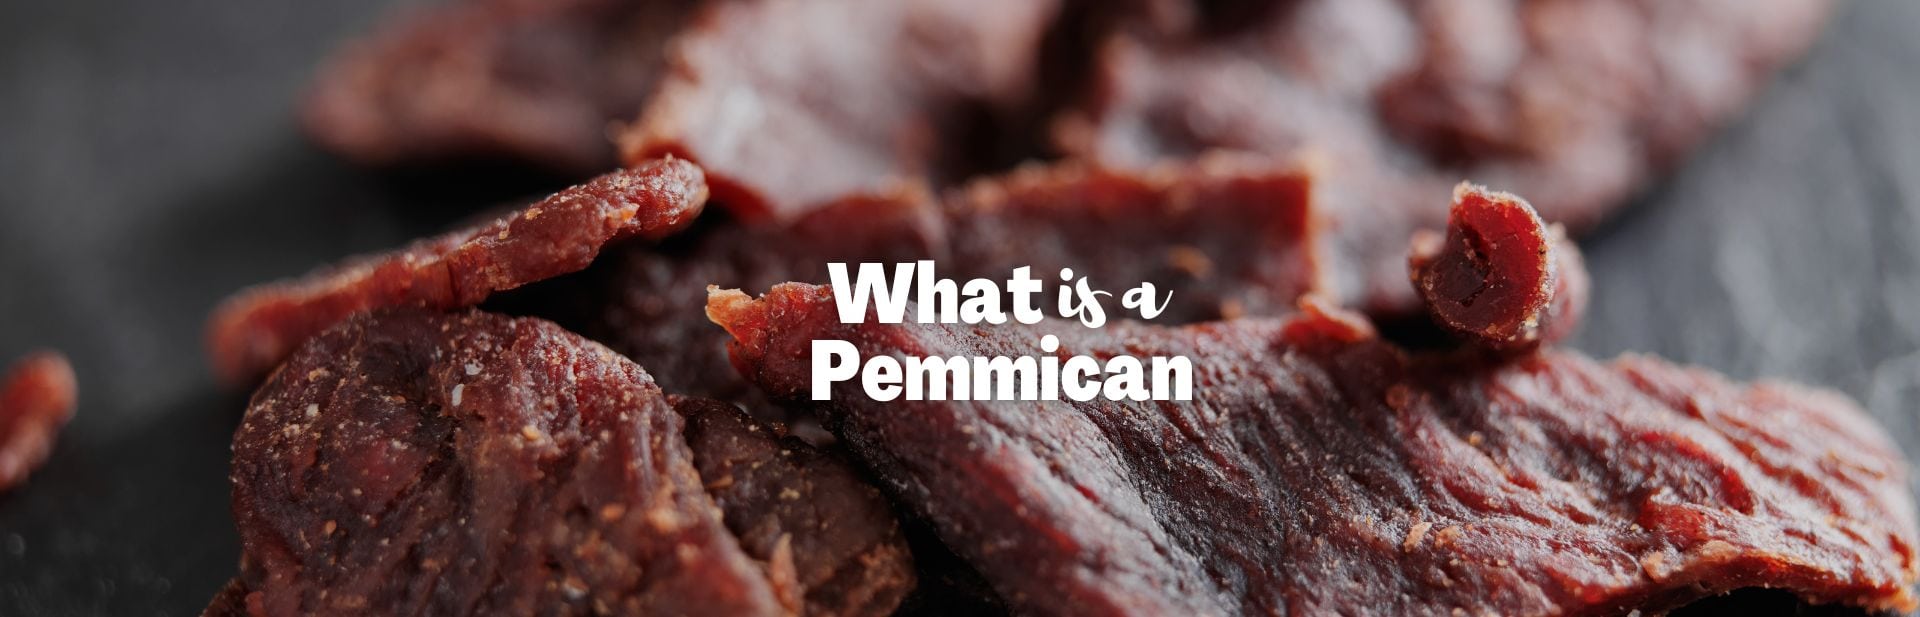 What is Pemmican? The Meatrimony of Jerky and Granola Bars